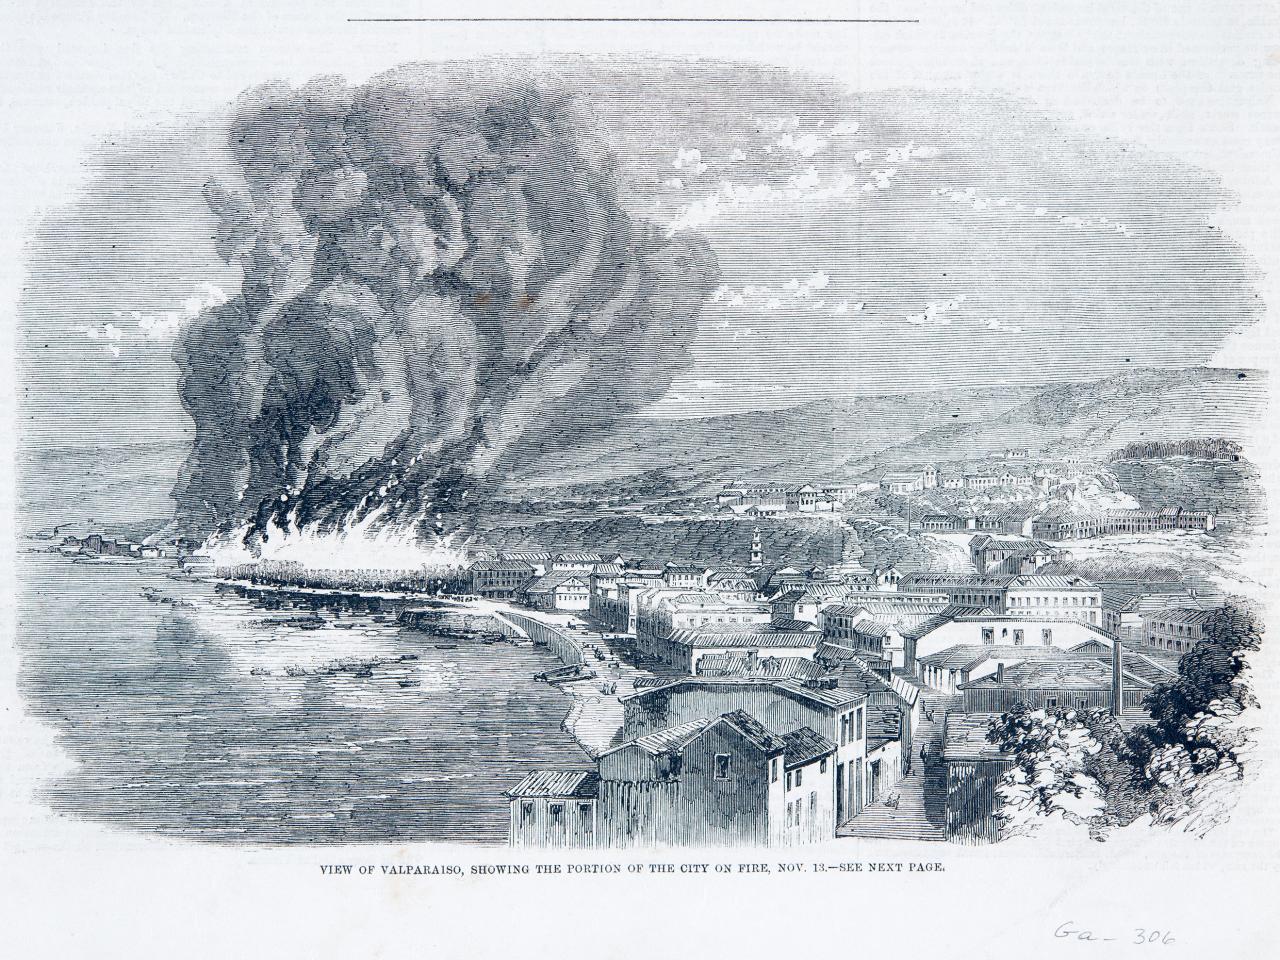 View of Valparaíso, showing the portion of the city on fire